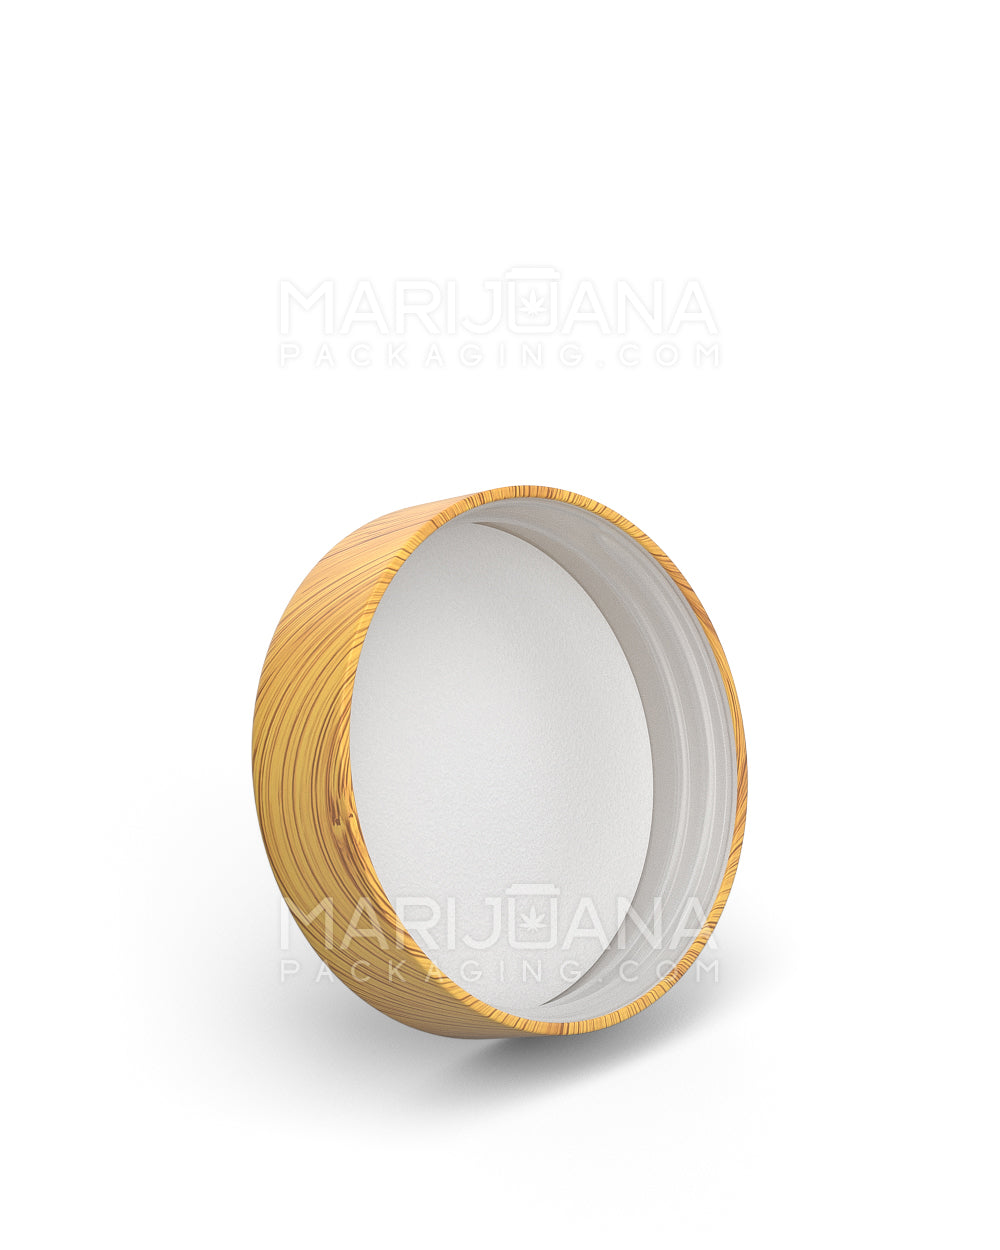 Child Resistant | Smooth Flat Push Down & Turn Plastic Caps w/ Foam Liner | 48mm - Bamboo Wood - 100 Count